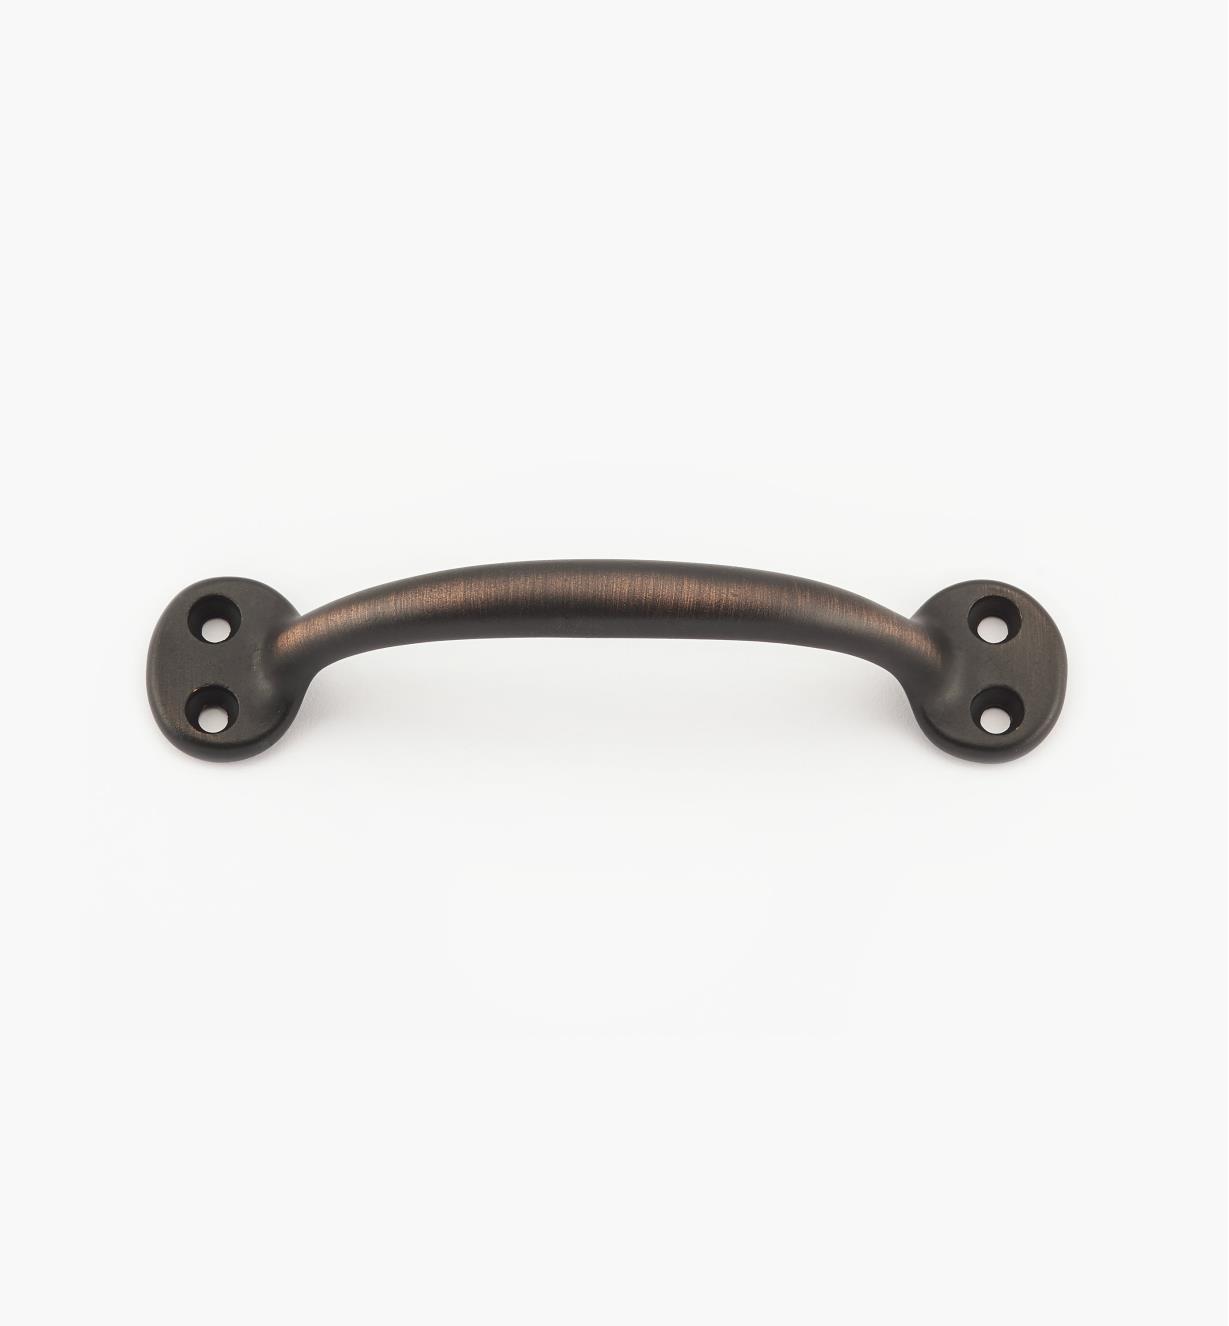 02W2697 - Weathered Bronze Suite - 4 7/8" x 1 1/8" Cast Utility Handle